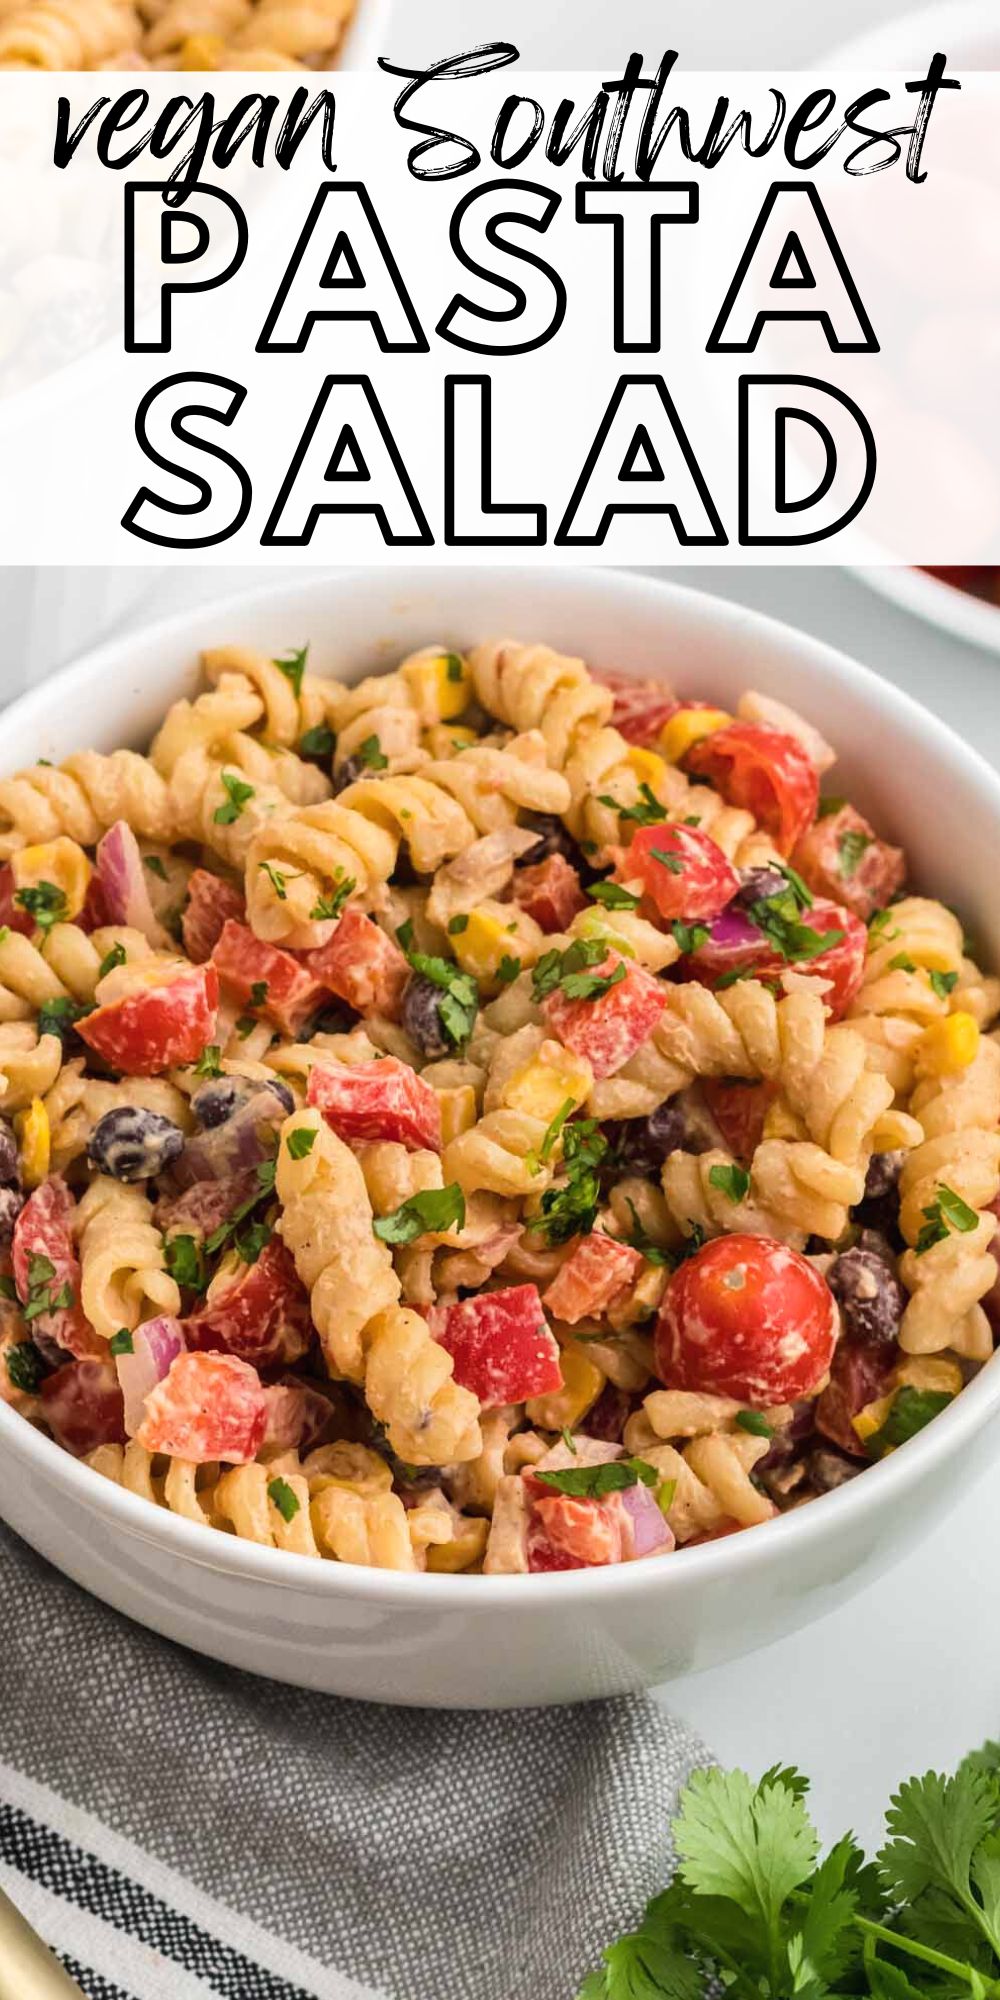 Bowl of Southwest pasta salad with beans and veggies and a text header reading "vegan Southwest pasta salad".